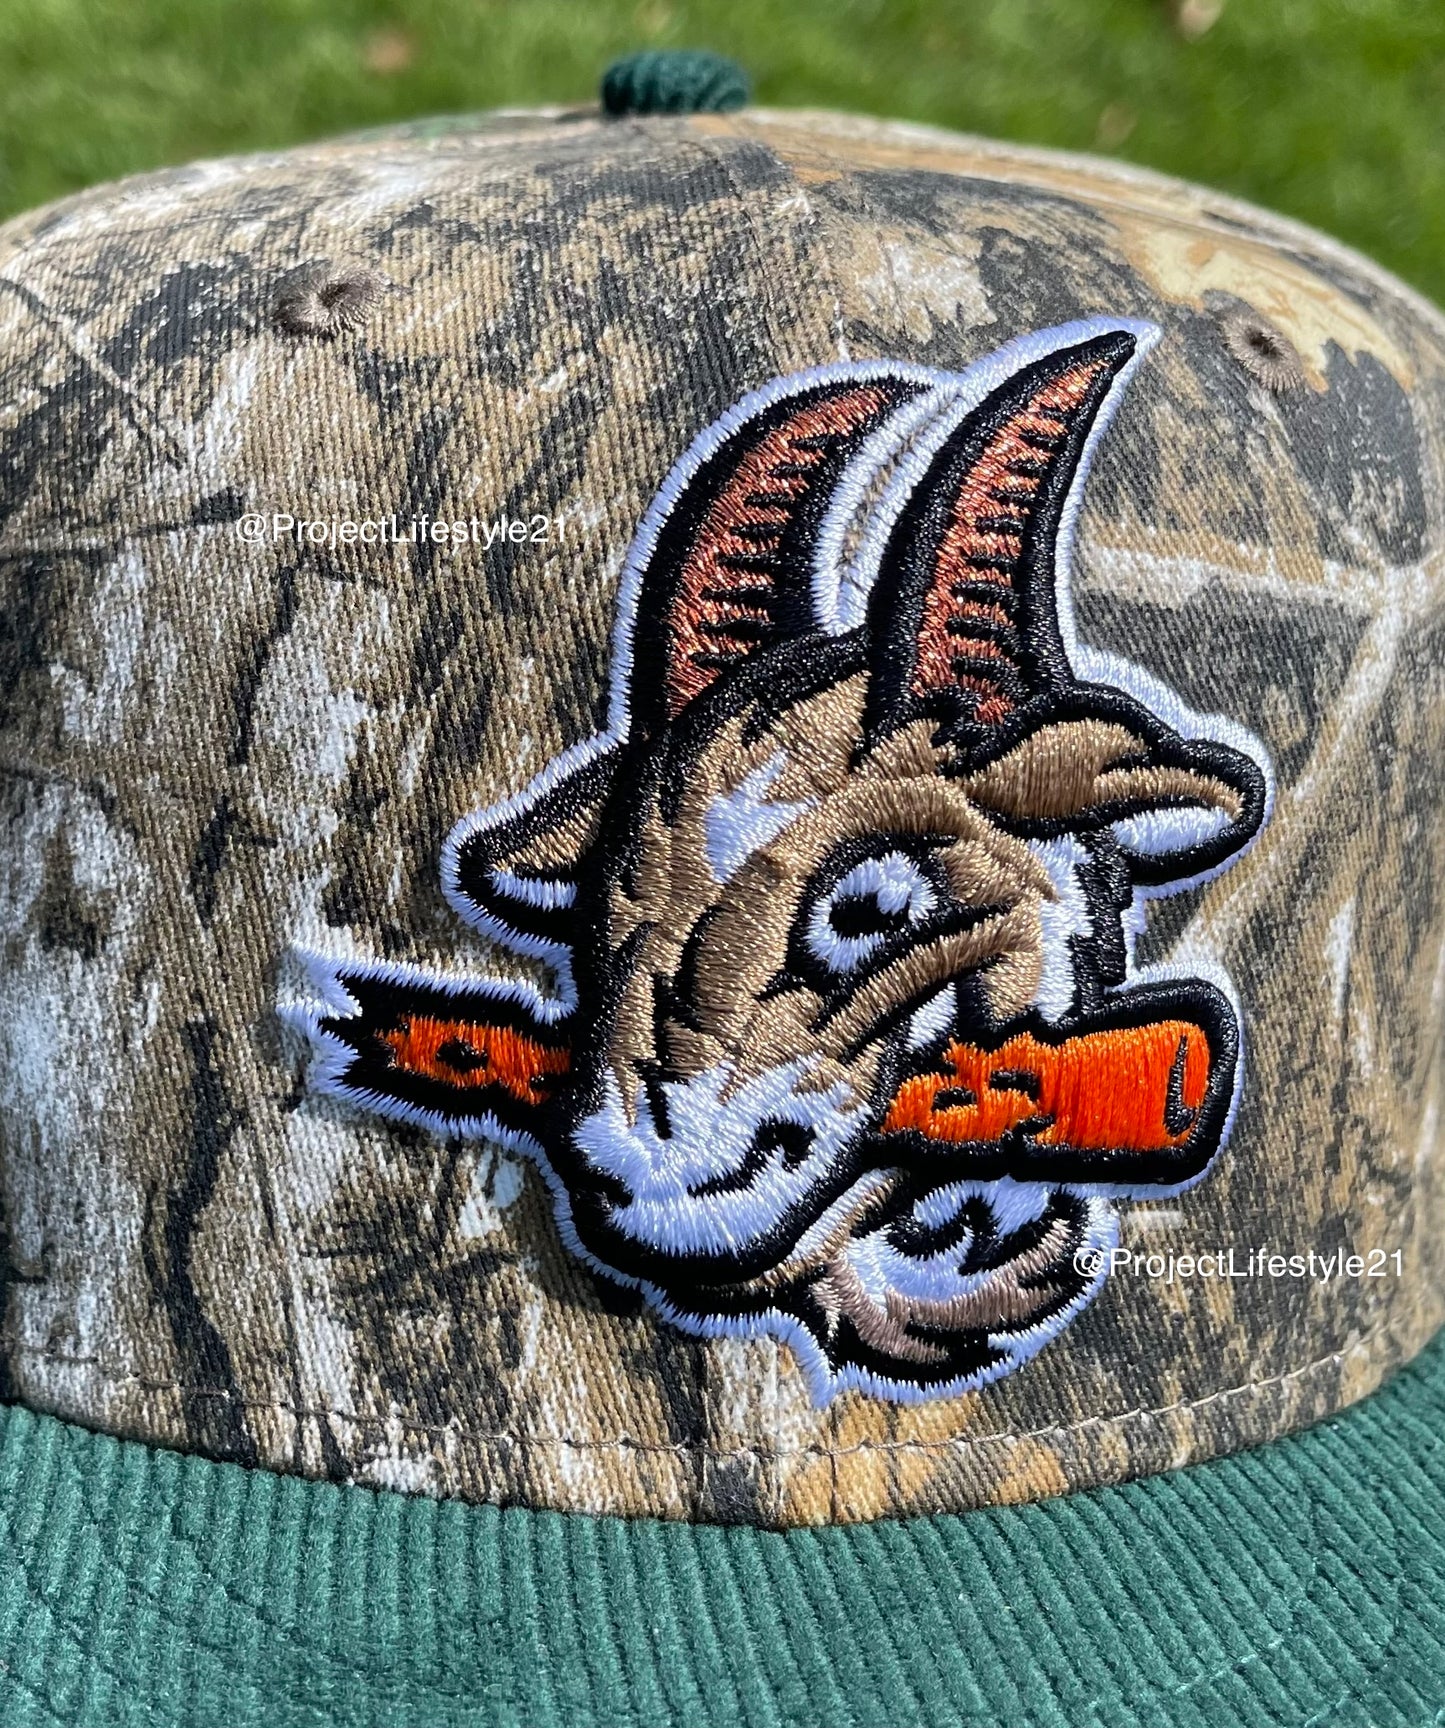 Hartford Yard Goats Real Tree Camo 2021 All Star Bash Patch Fitted Hat (Real Tree/Green)